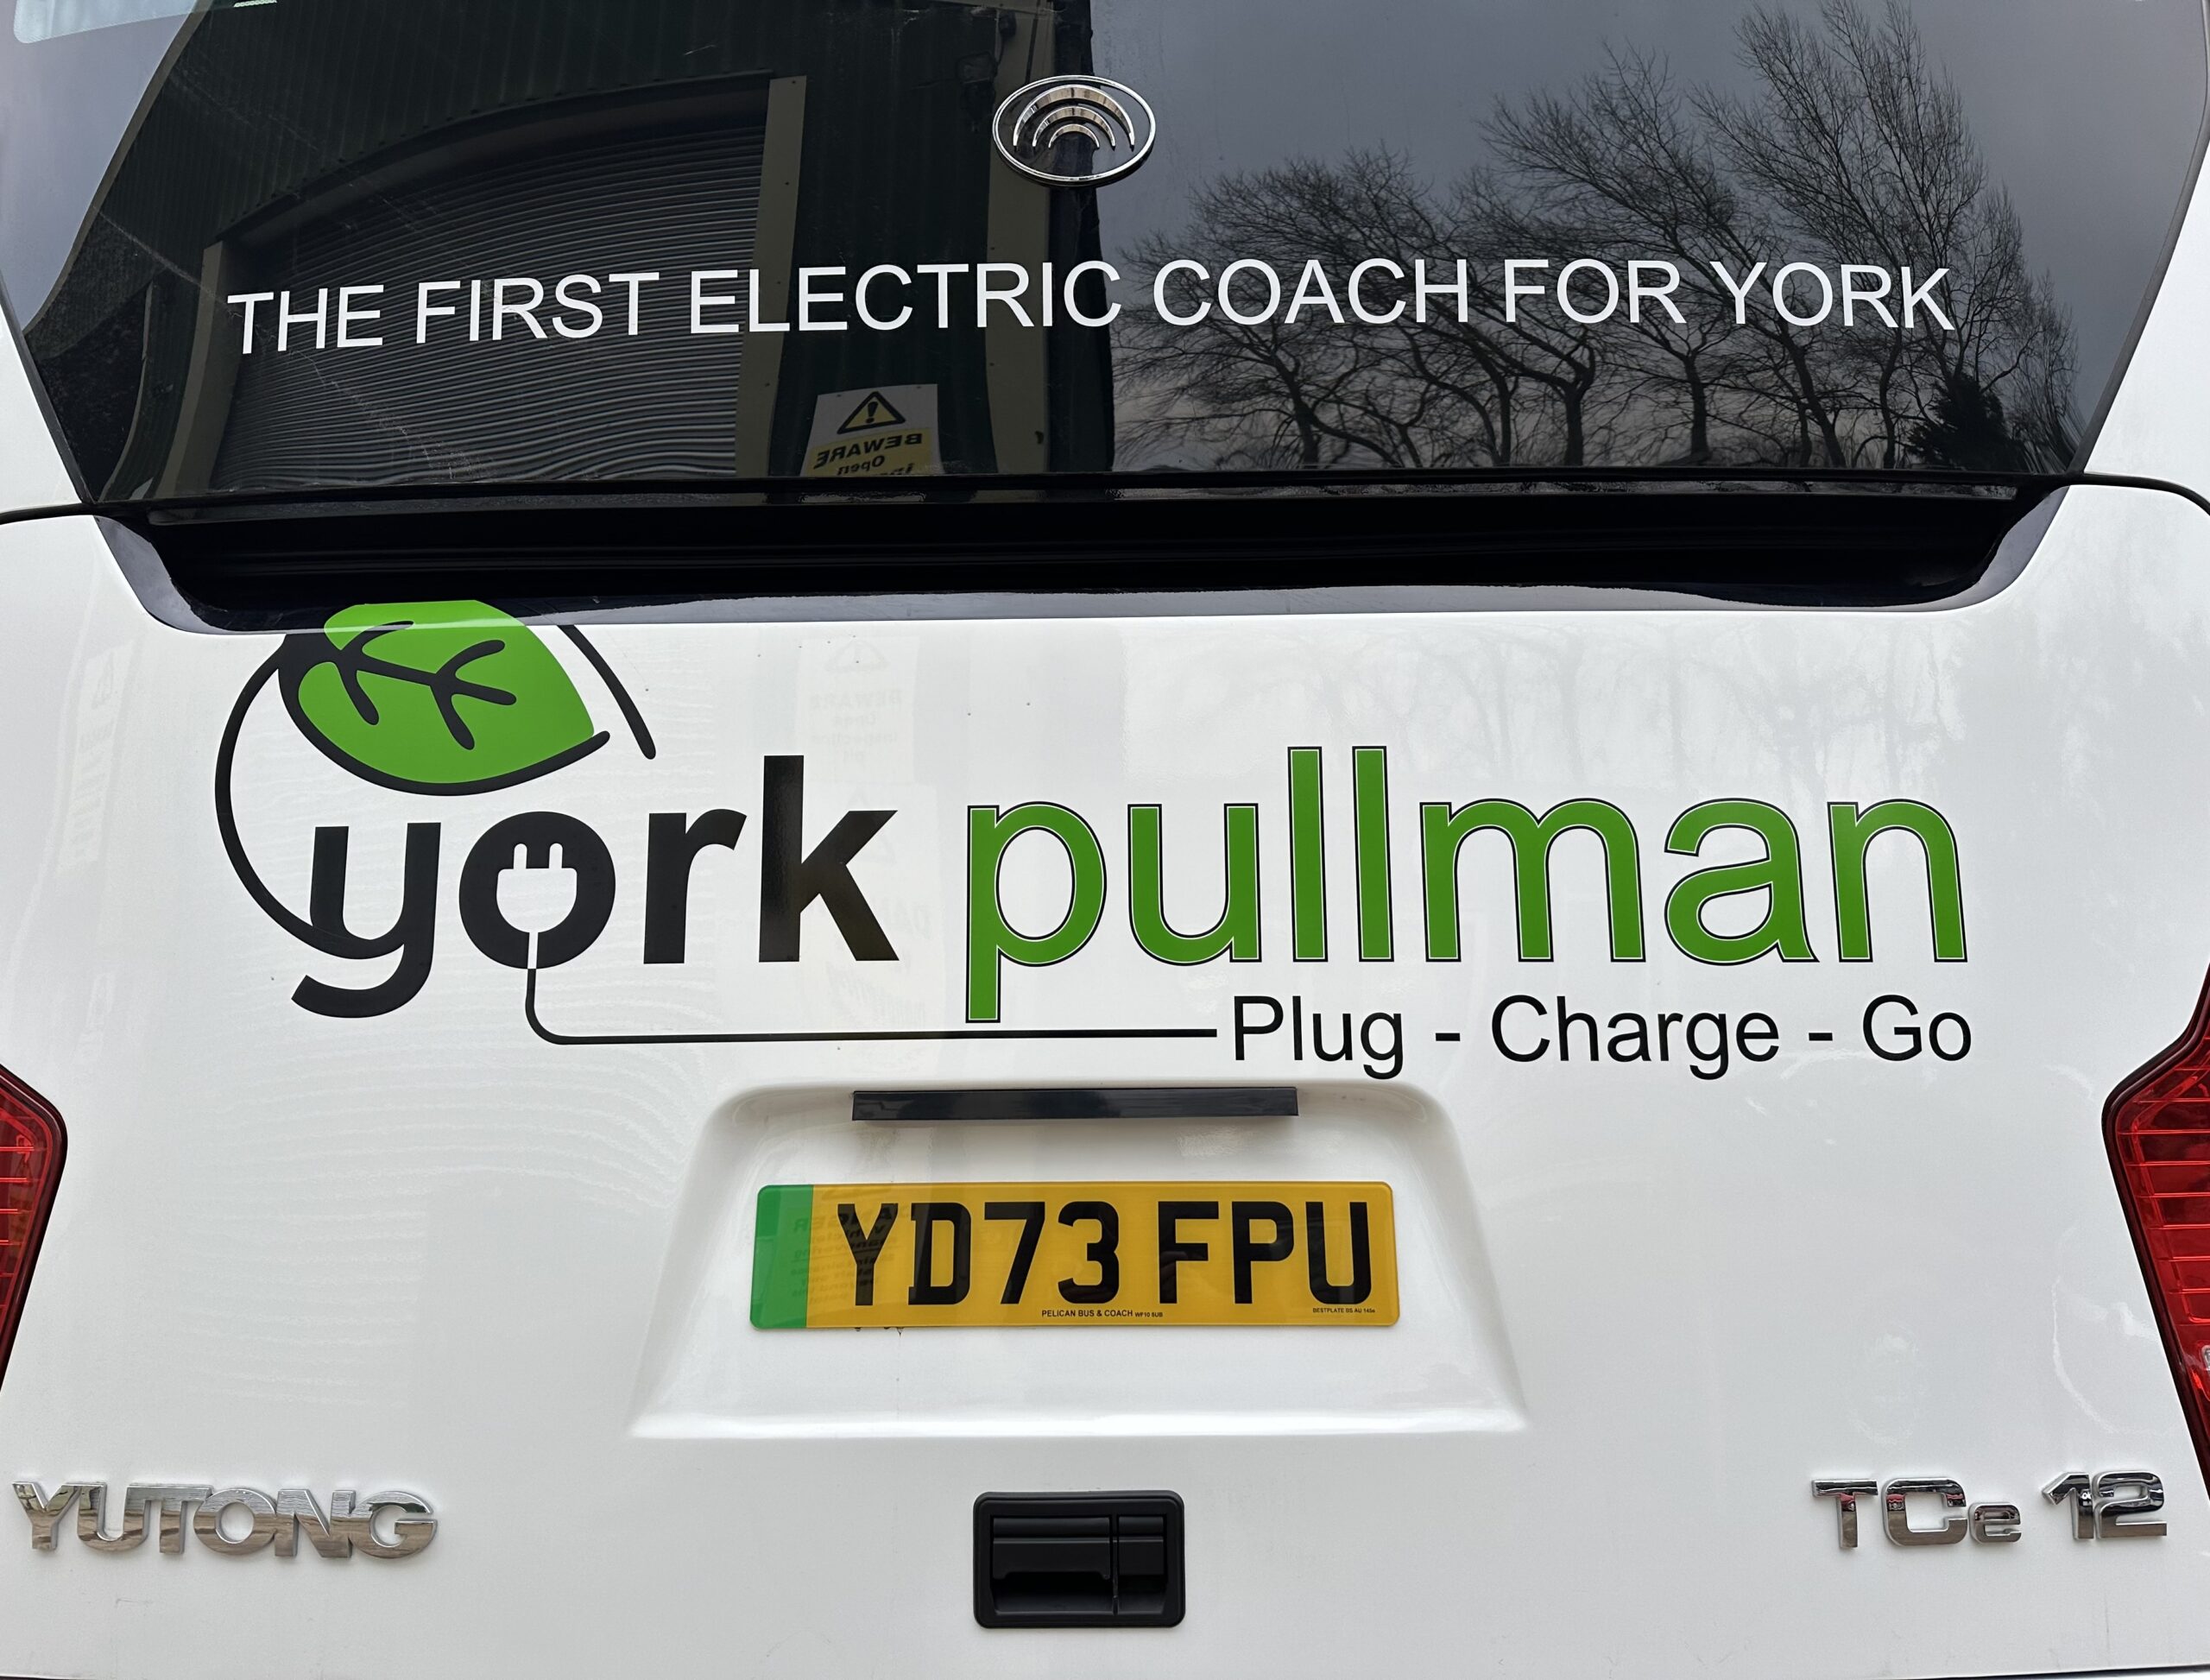 First Electric Coach For York